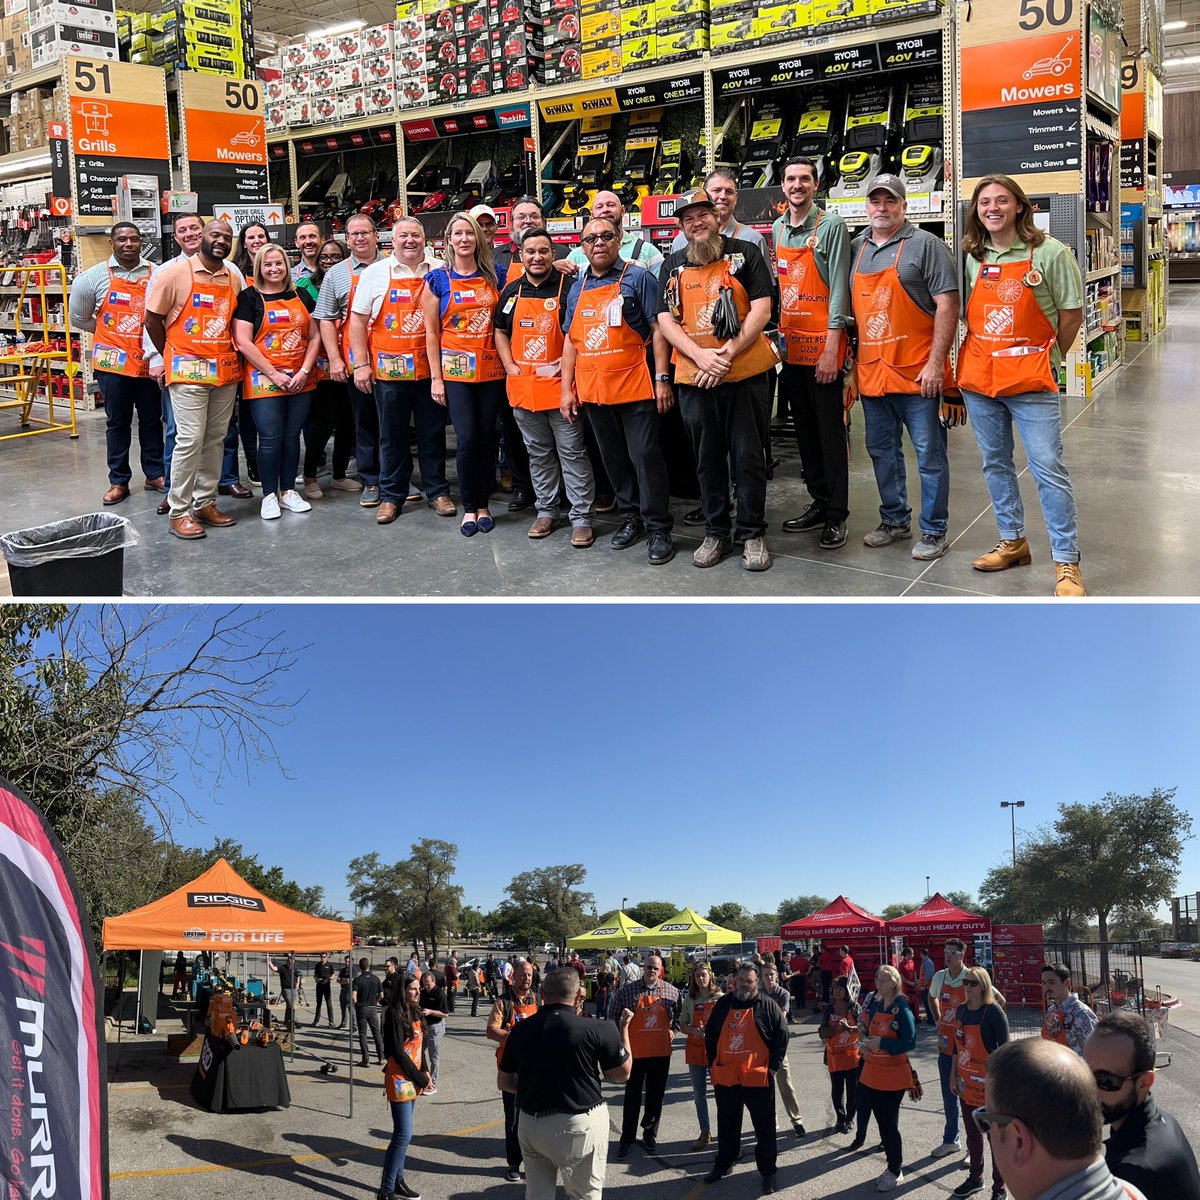 Great job to our Cedar Park team for hosting our D28I MVP Walk! Your store looked outstanding! Thank you to our D28 team for putting together a great day for our associates! #PoweroftheGulf @jimrecore @garland_haynes @robmm13